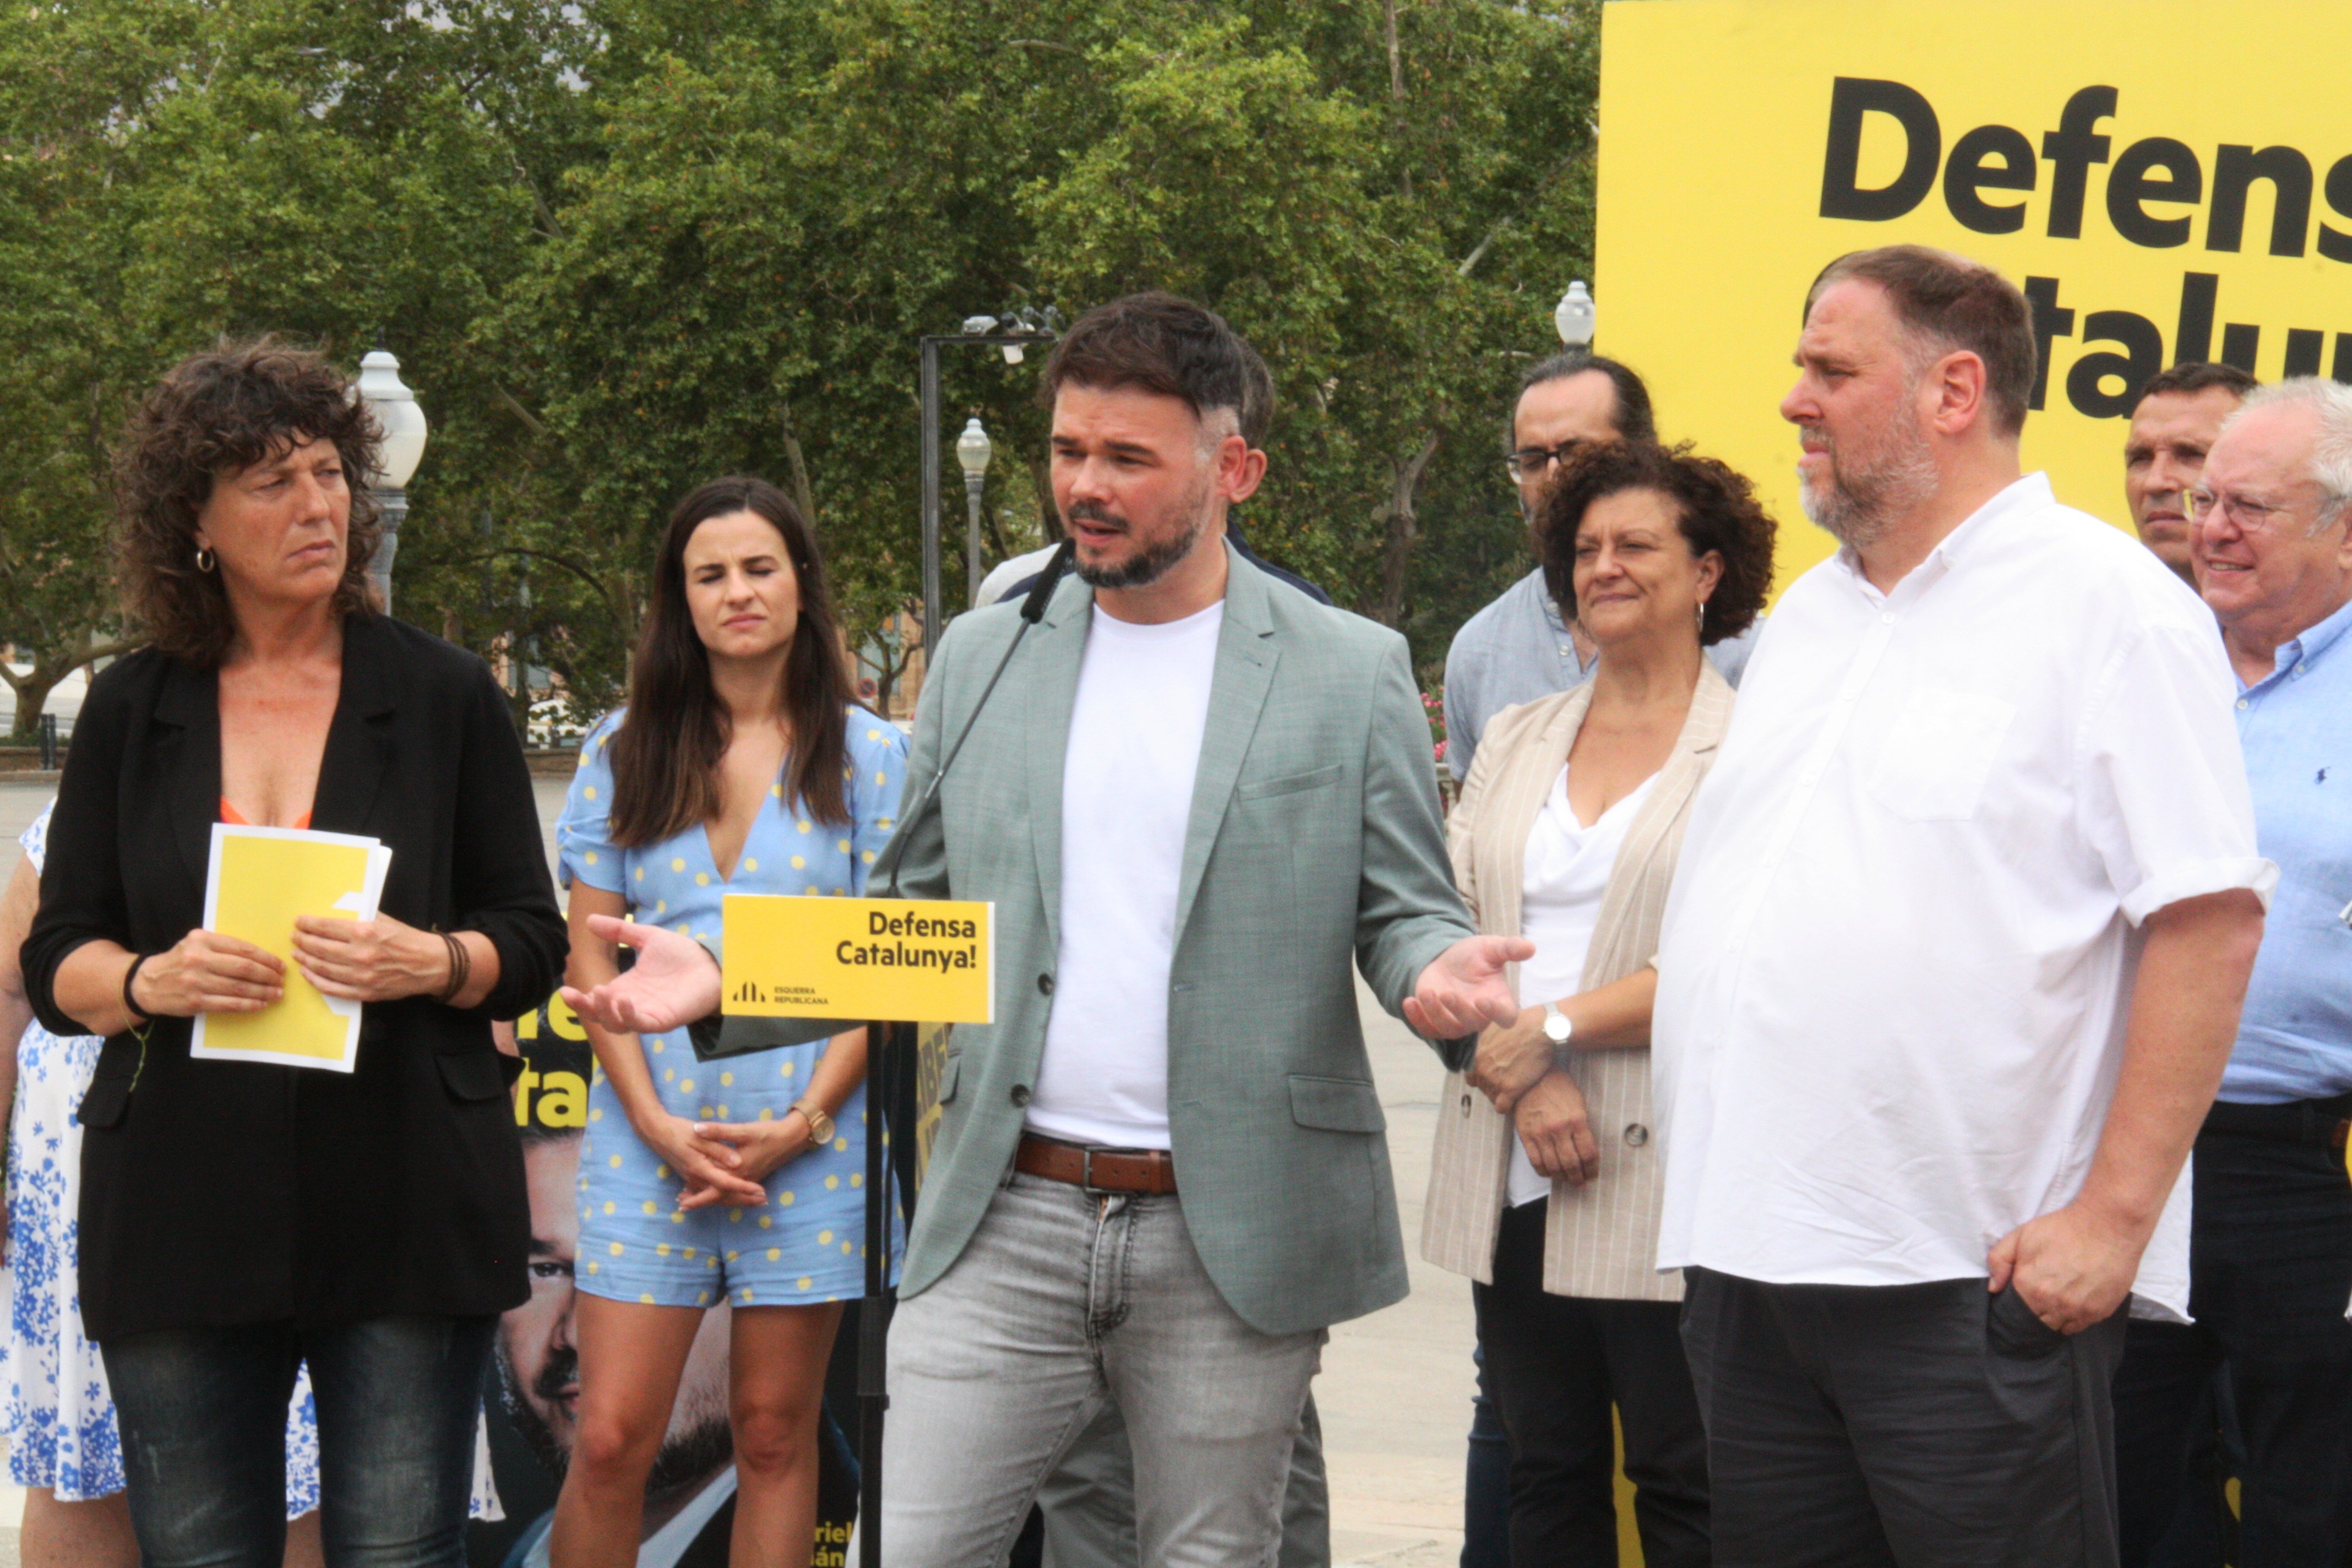 Rufián refutes Junts' criticism: "Being useful does not make us less pro-independence".